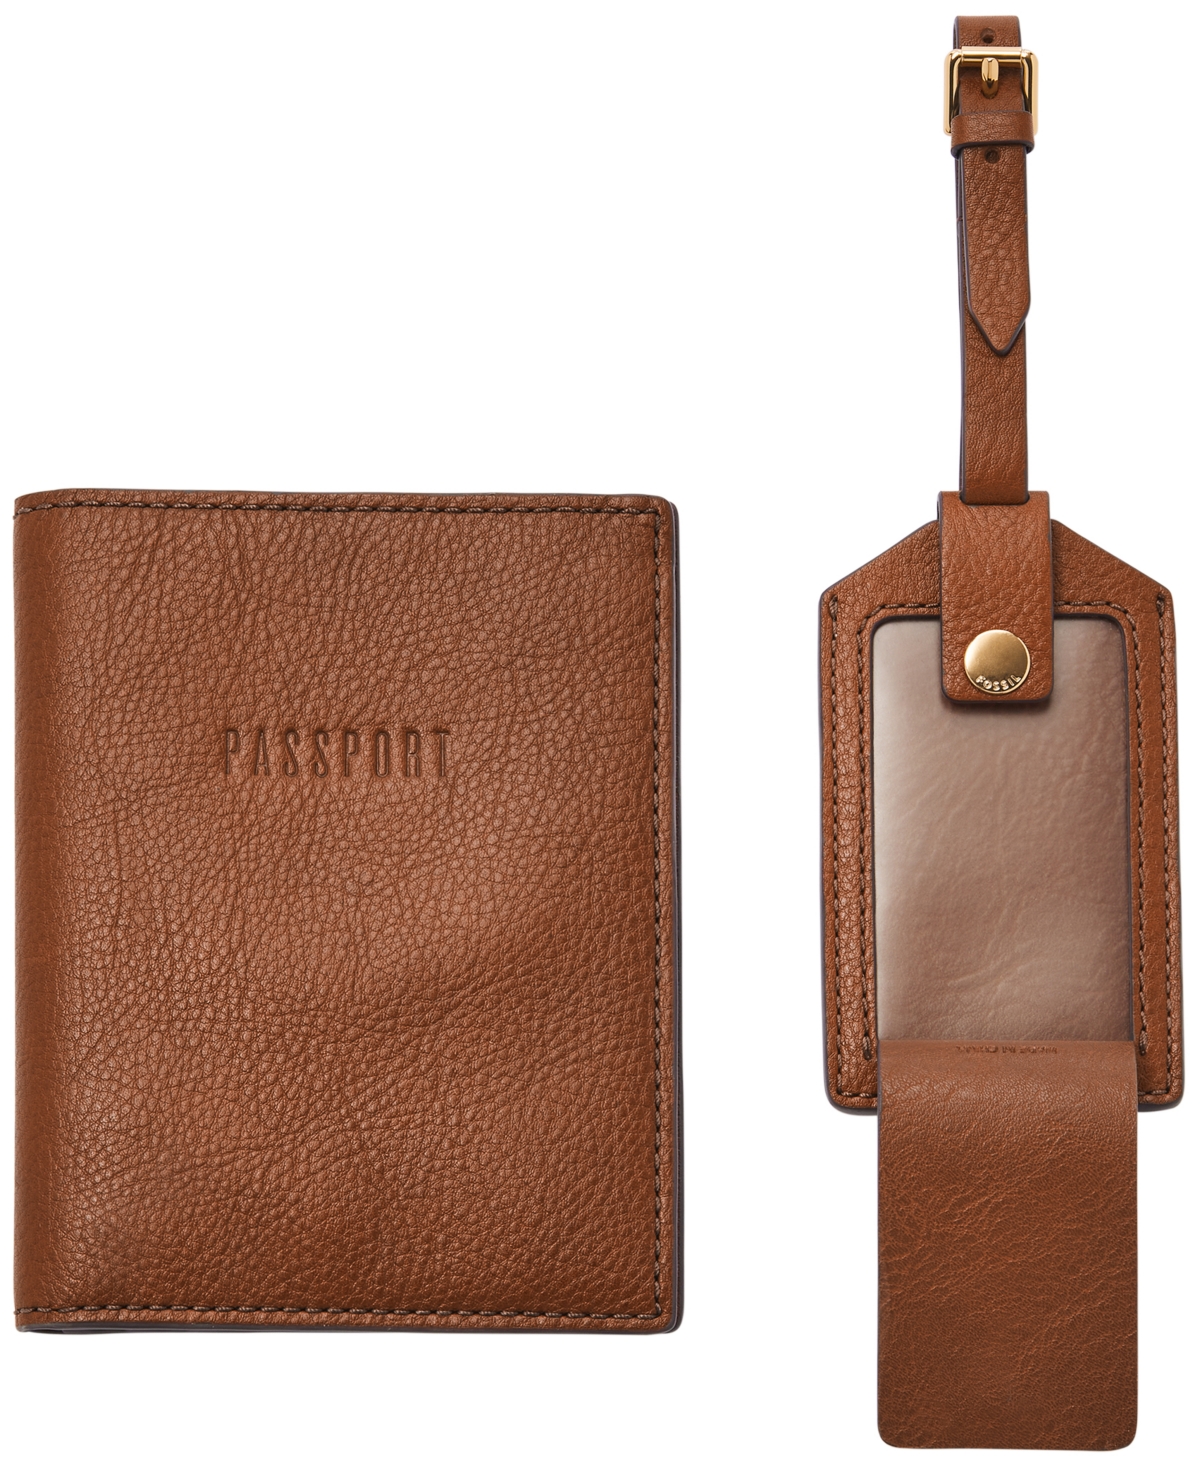 Fossil Passport Case And Luggage Tag Gift Set In Brown